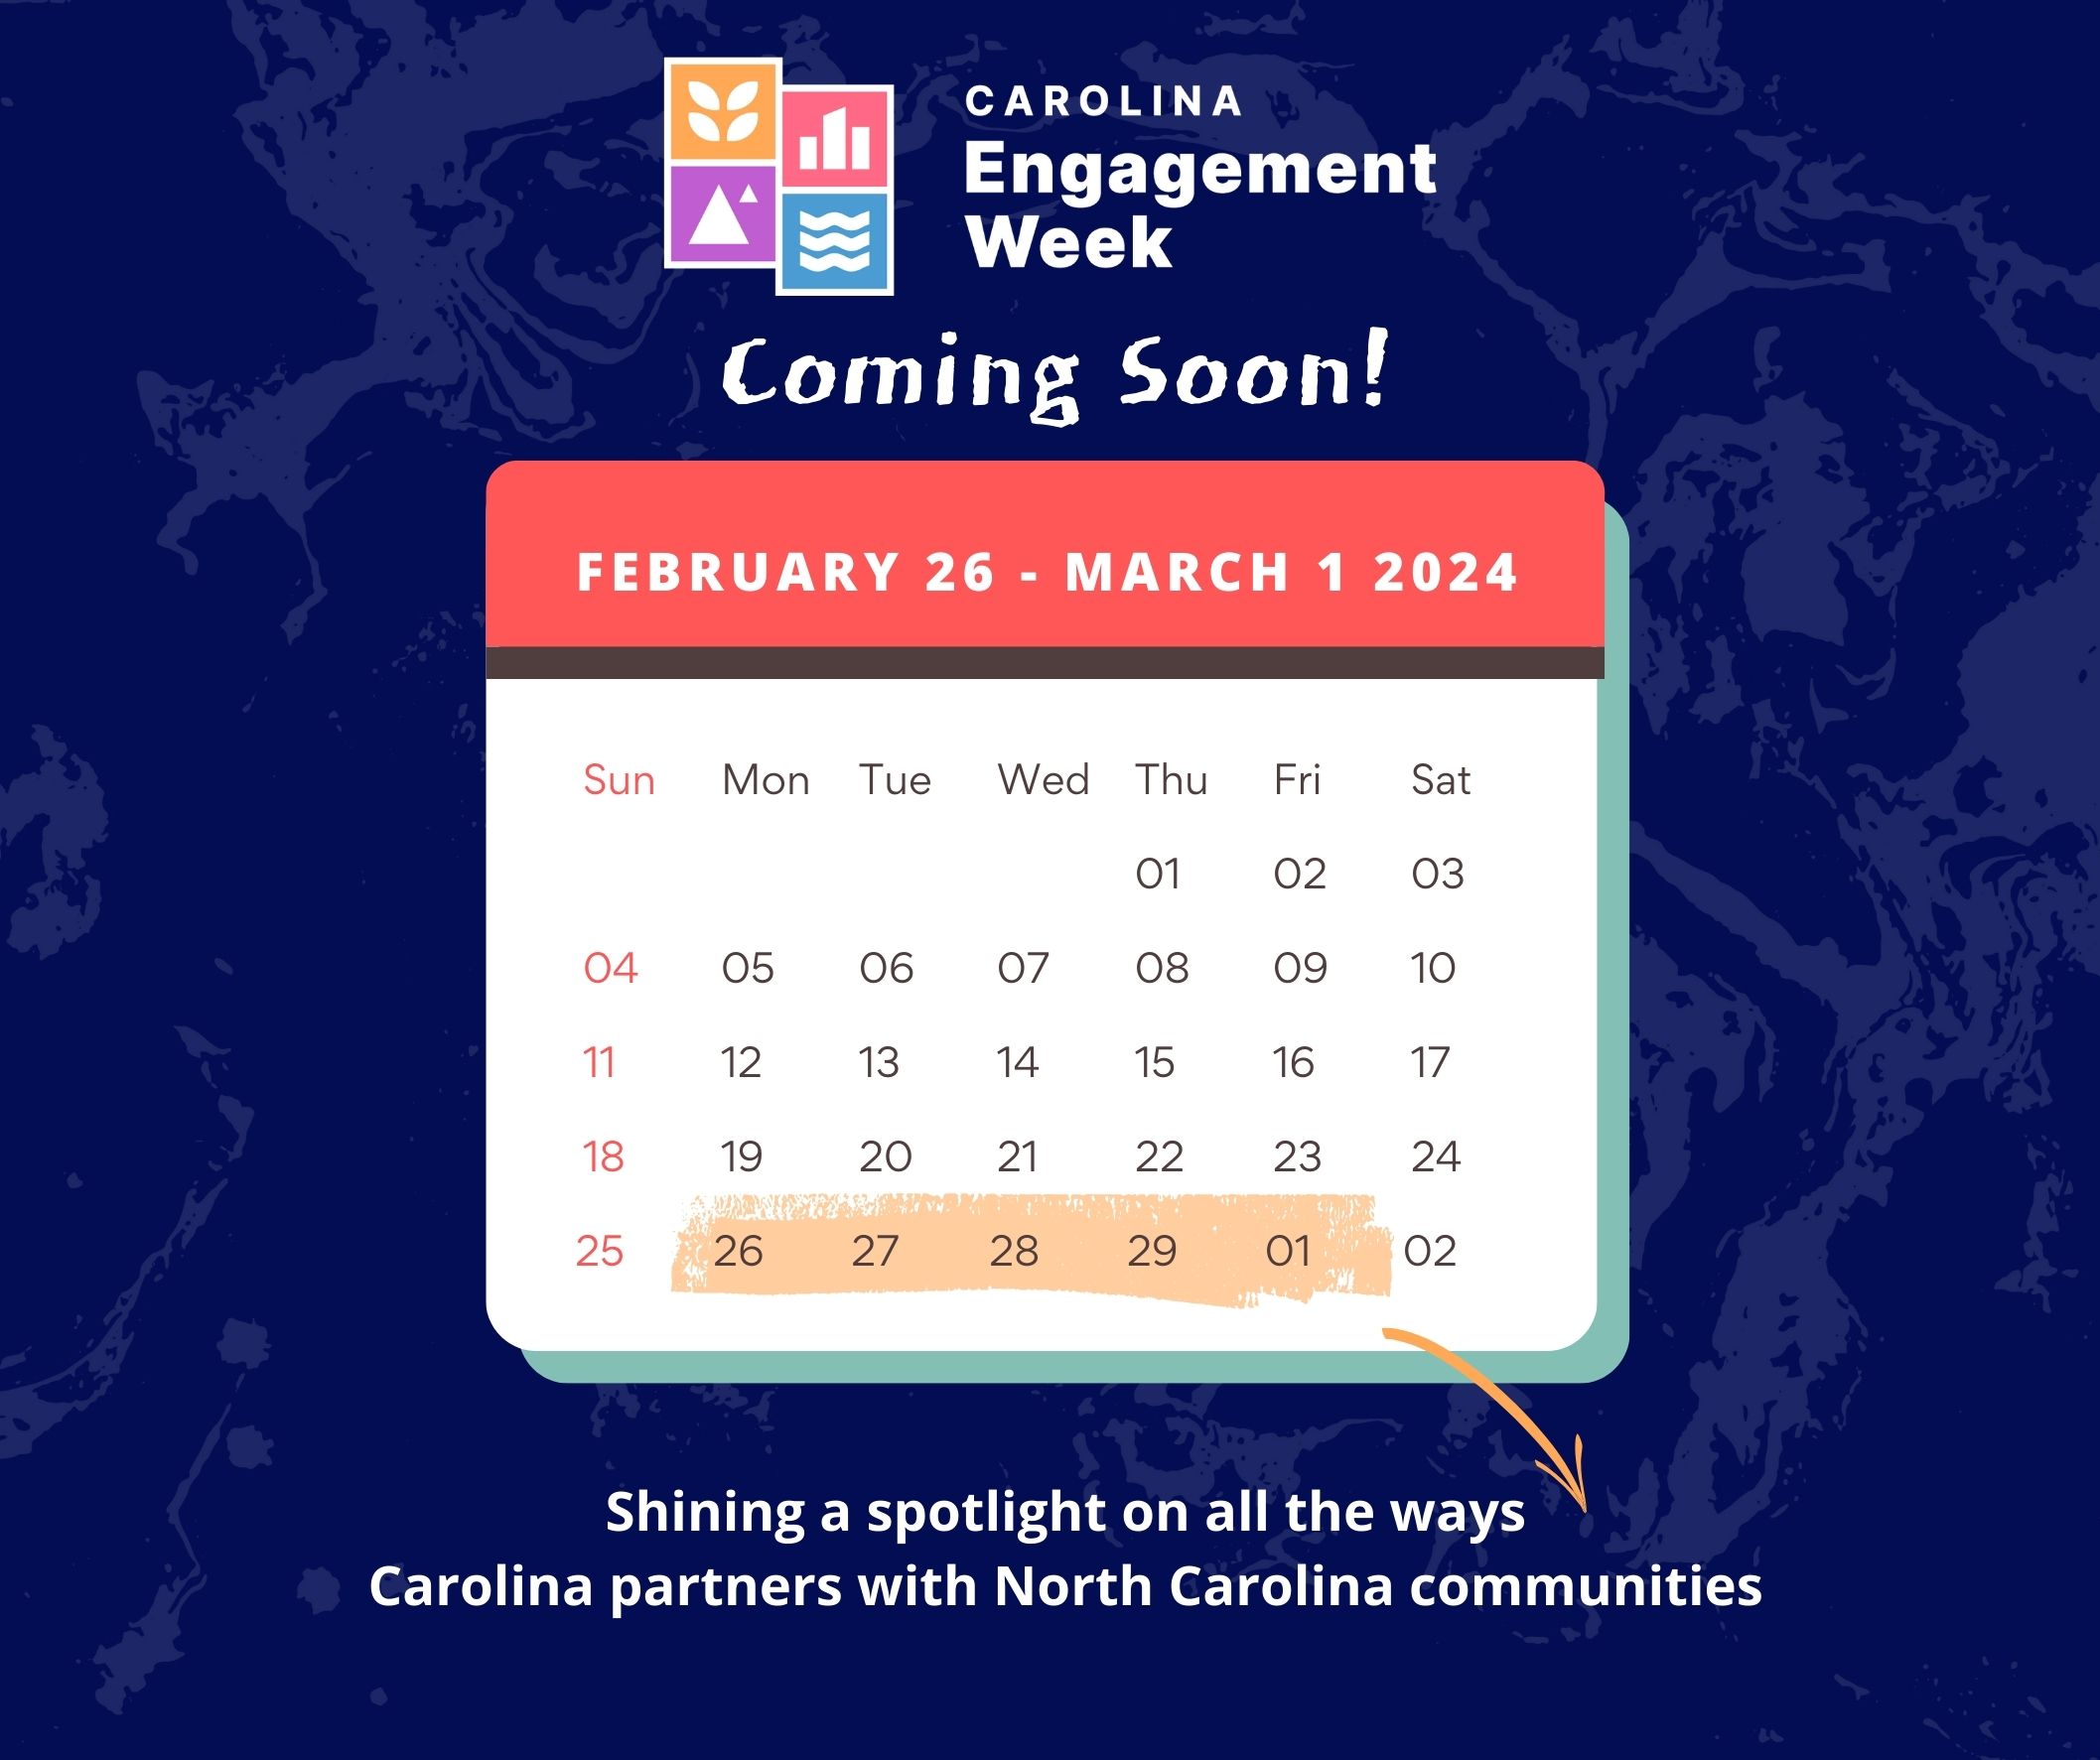 Carolina Engagement Week is coming soon on February 26 through March 1, 2024. Shining a spotlight on all the ways Carolina partners with North Carolina communities.